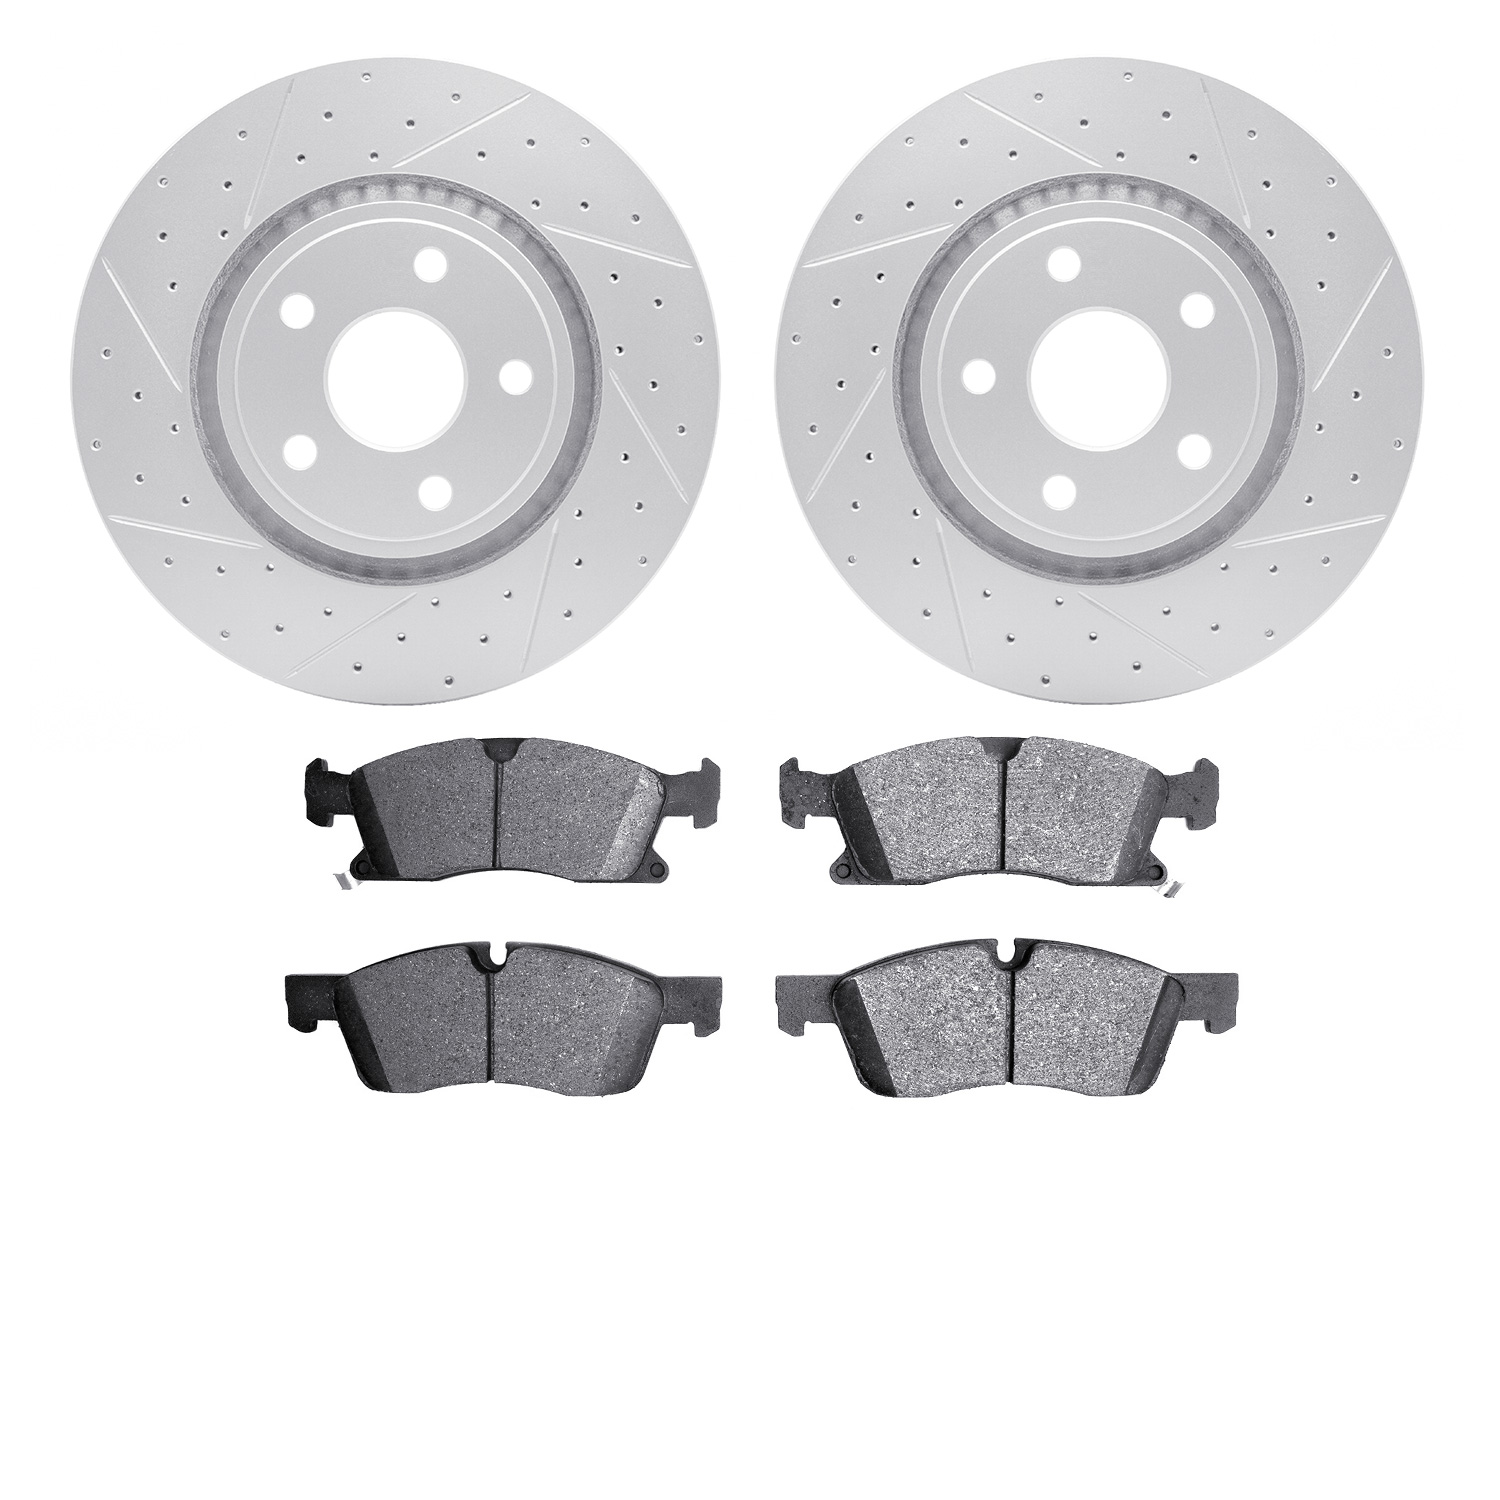 2402-42009 Geoperformance Drilled/Slotted Brake Rotors with Ultimate-Duty Brake Pads Kit, Fits Select Mopar, Position: Front